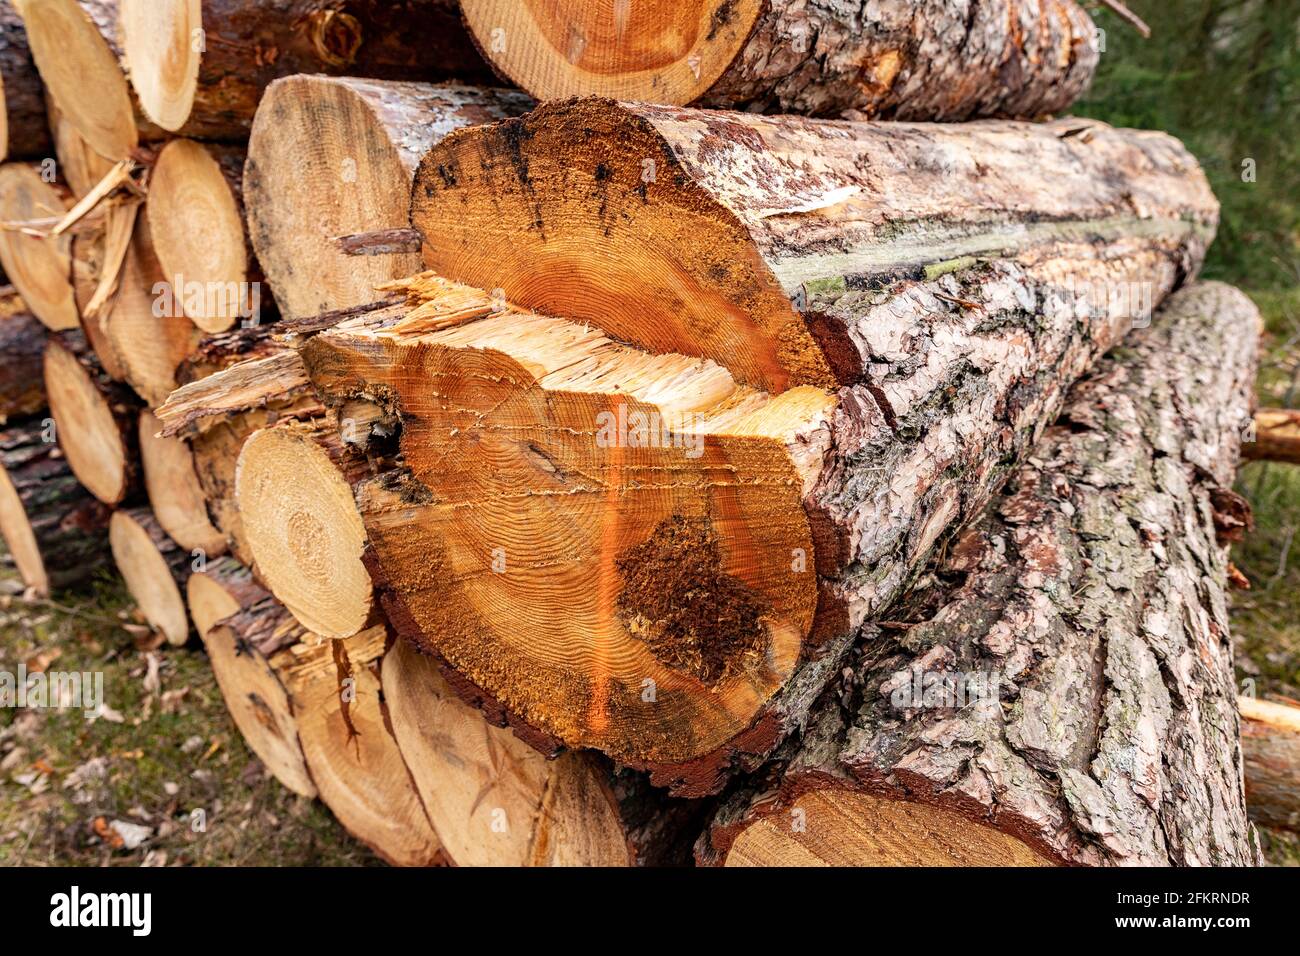 Logs of pine wood stacked. A cross-section of a raw, freshly cut wood log. Spring season. Stock Photo